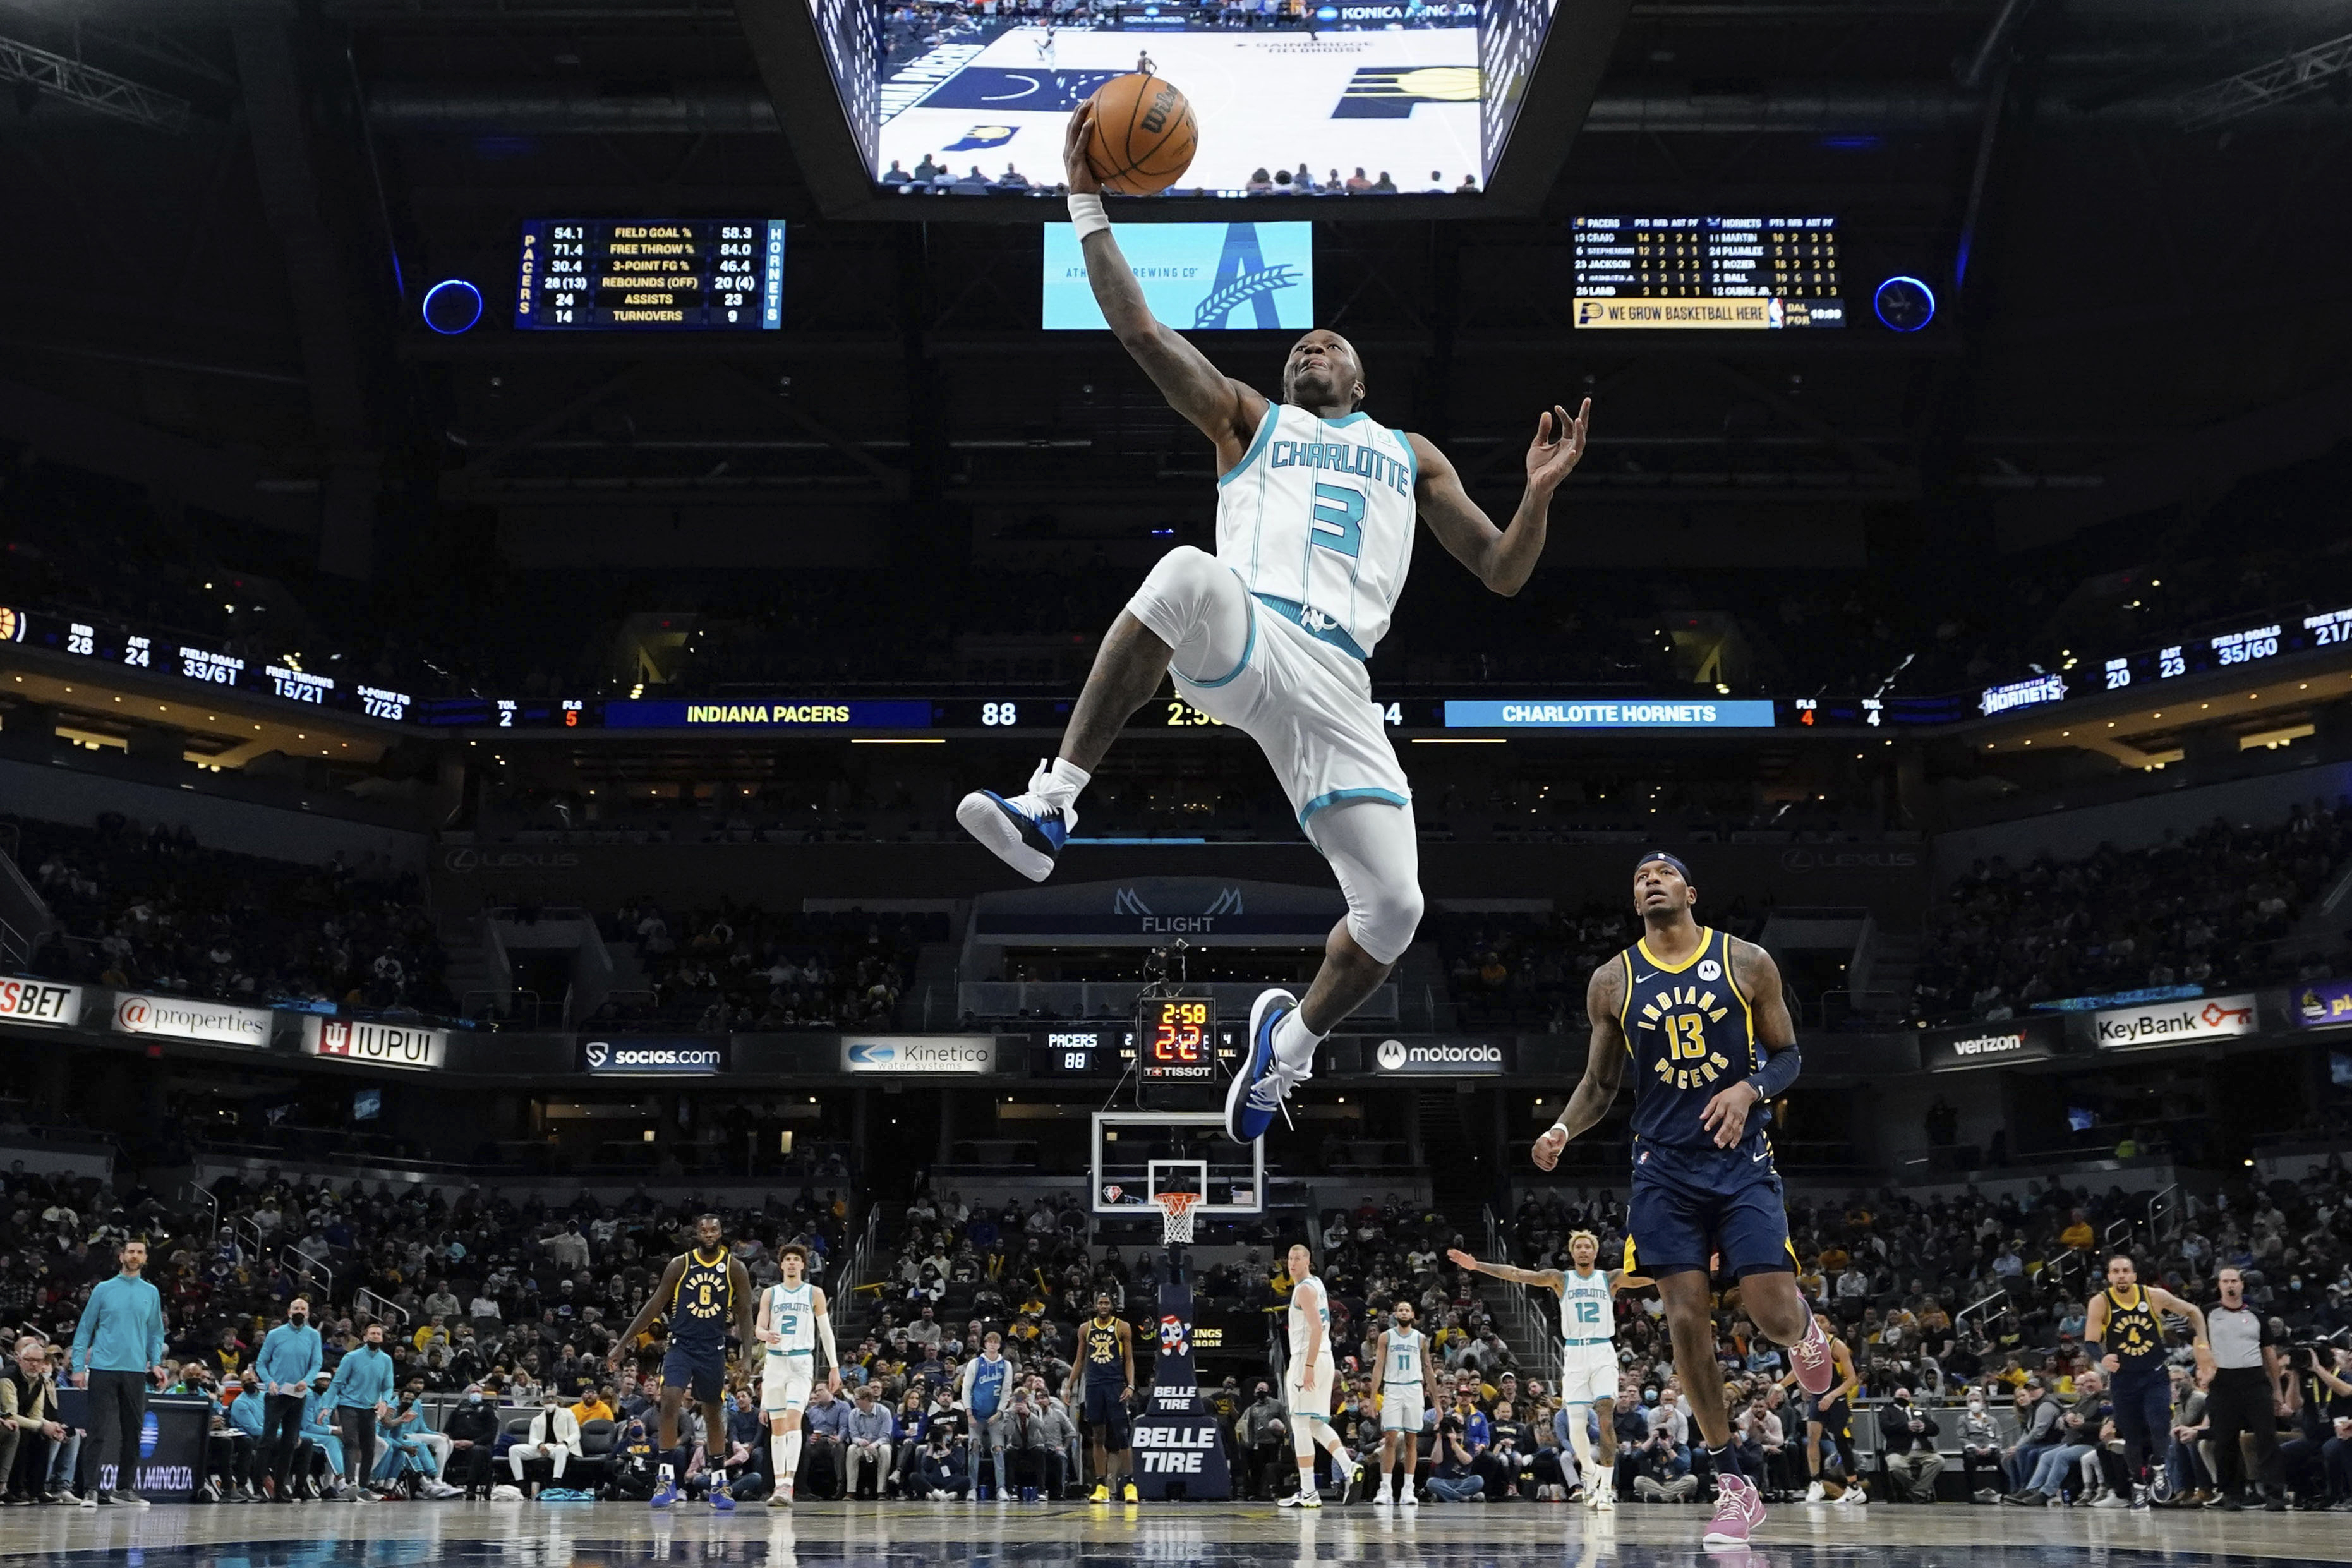 Charlotte Hornets homecoming a game changer - Charlotte Business Journal